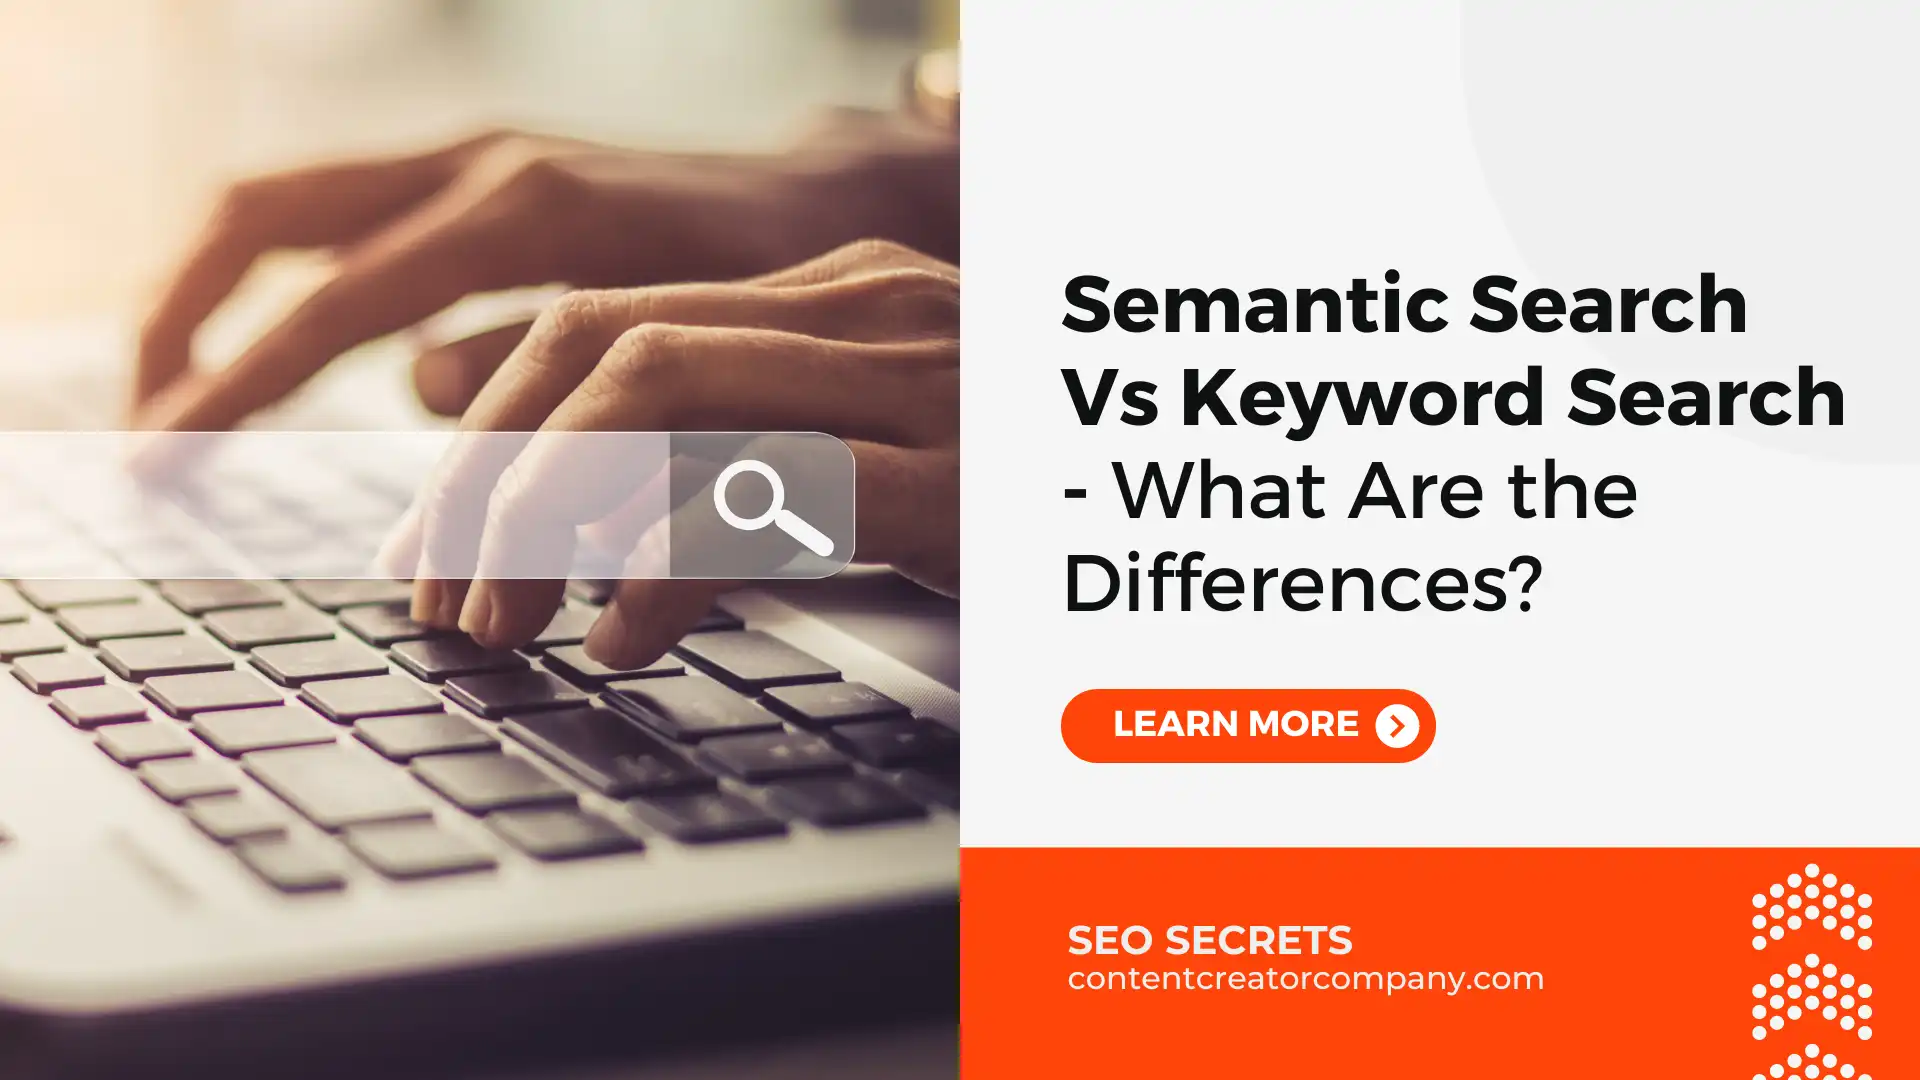 Semantic Search Vs Keyword Search - What Are the Differences?